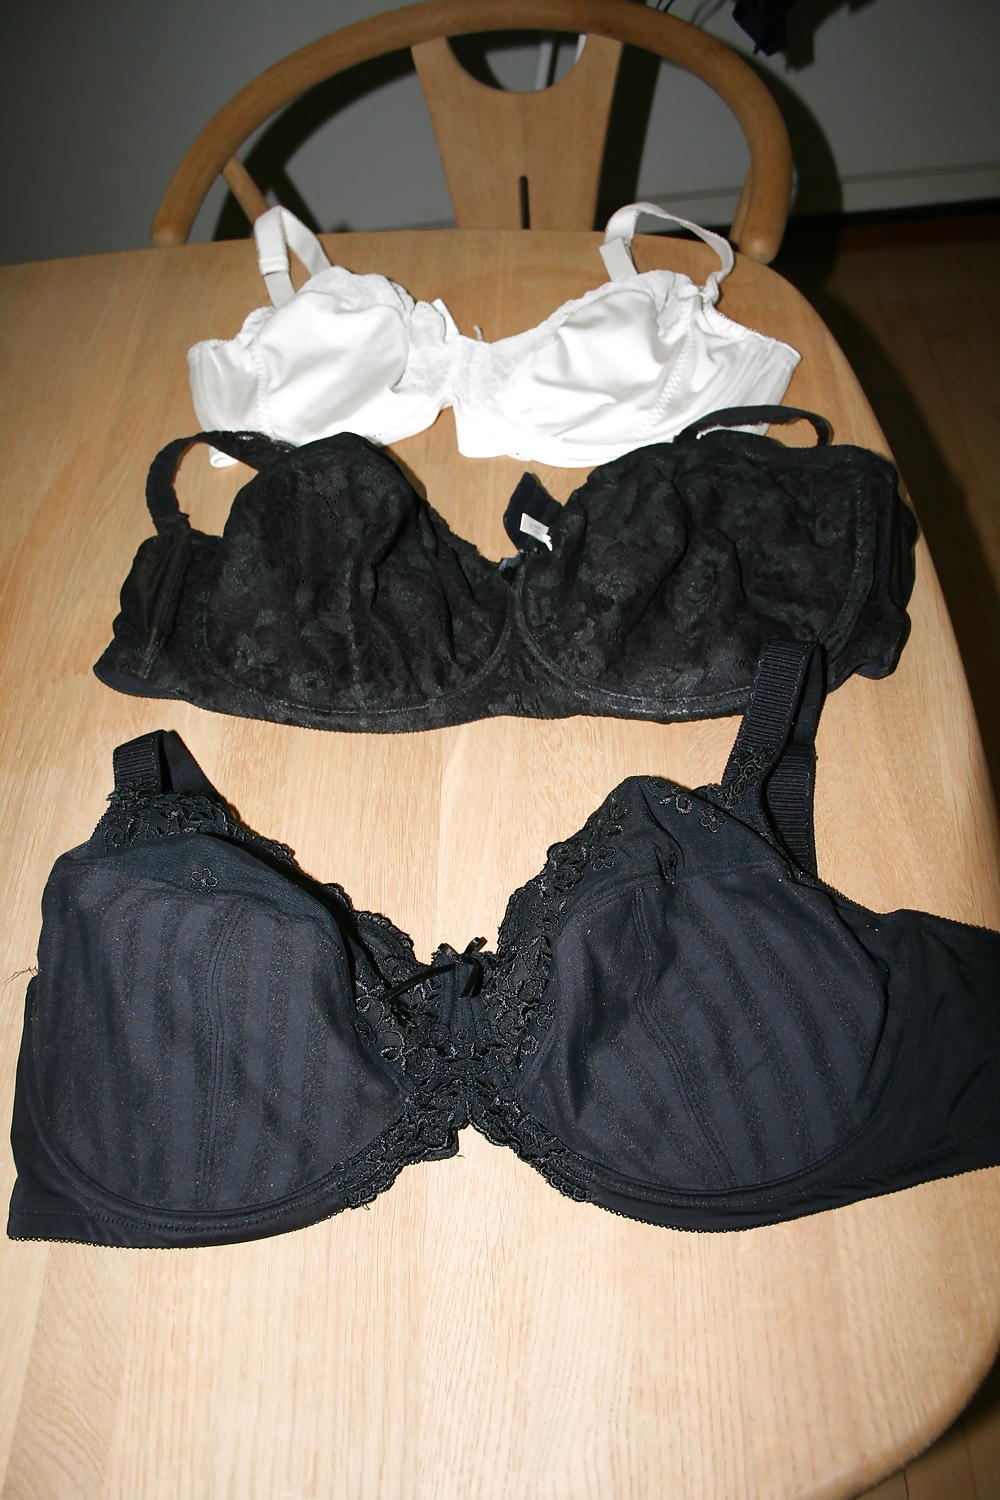 G cup bras and bigger #12082672